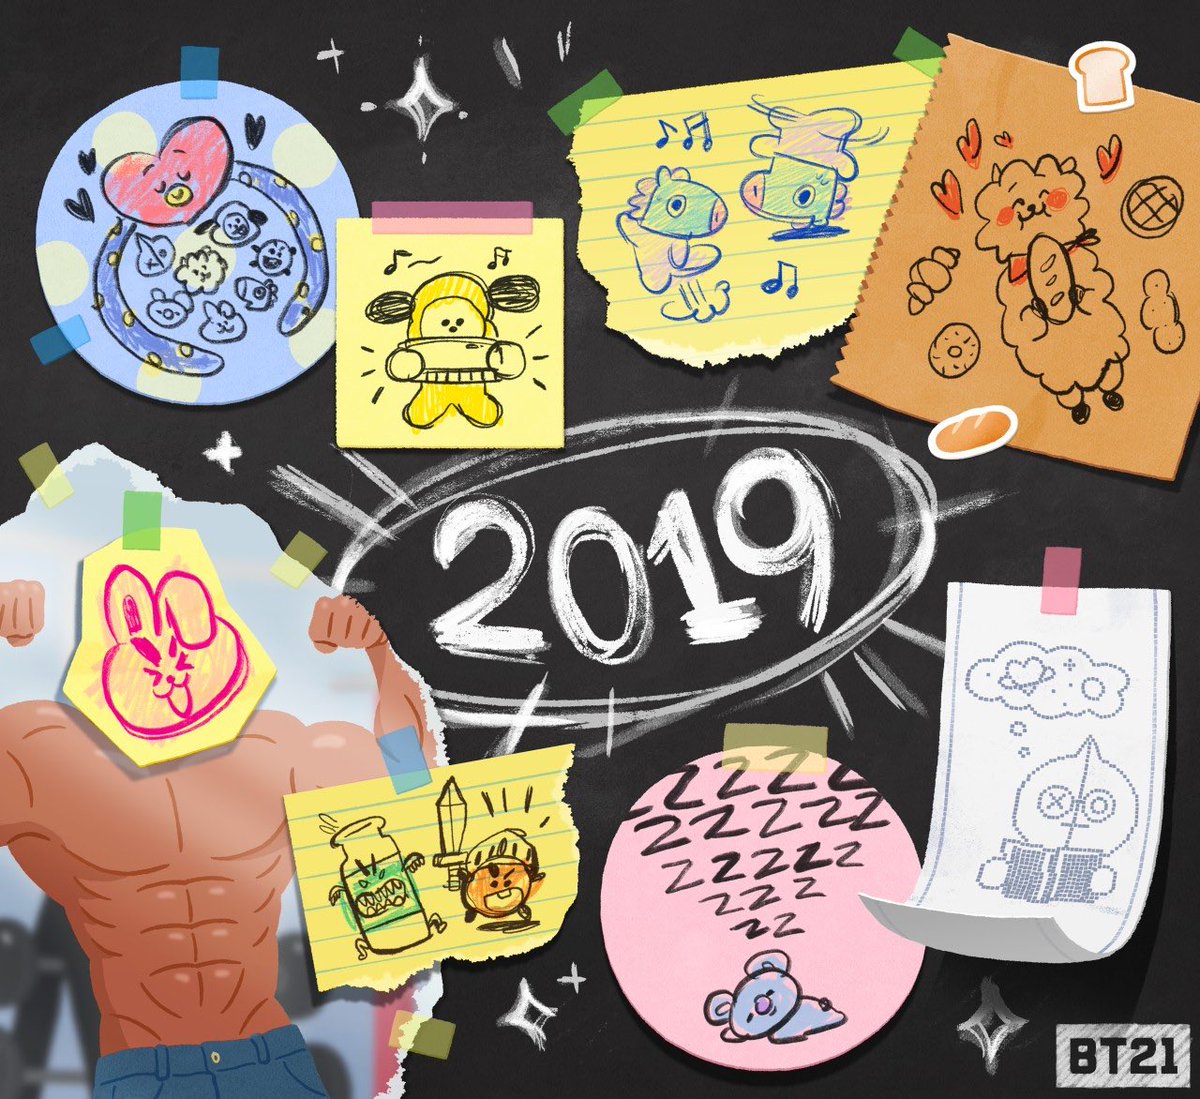 New Year, New Plan 😏
#What_you_could_not_have_imagined 
#Year2019 #NewYearsResolution #BT21